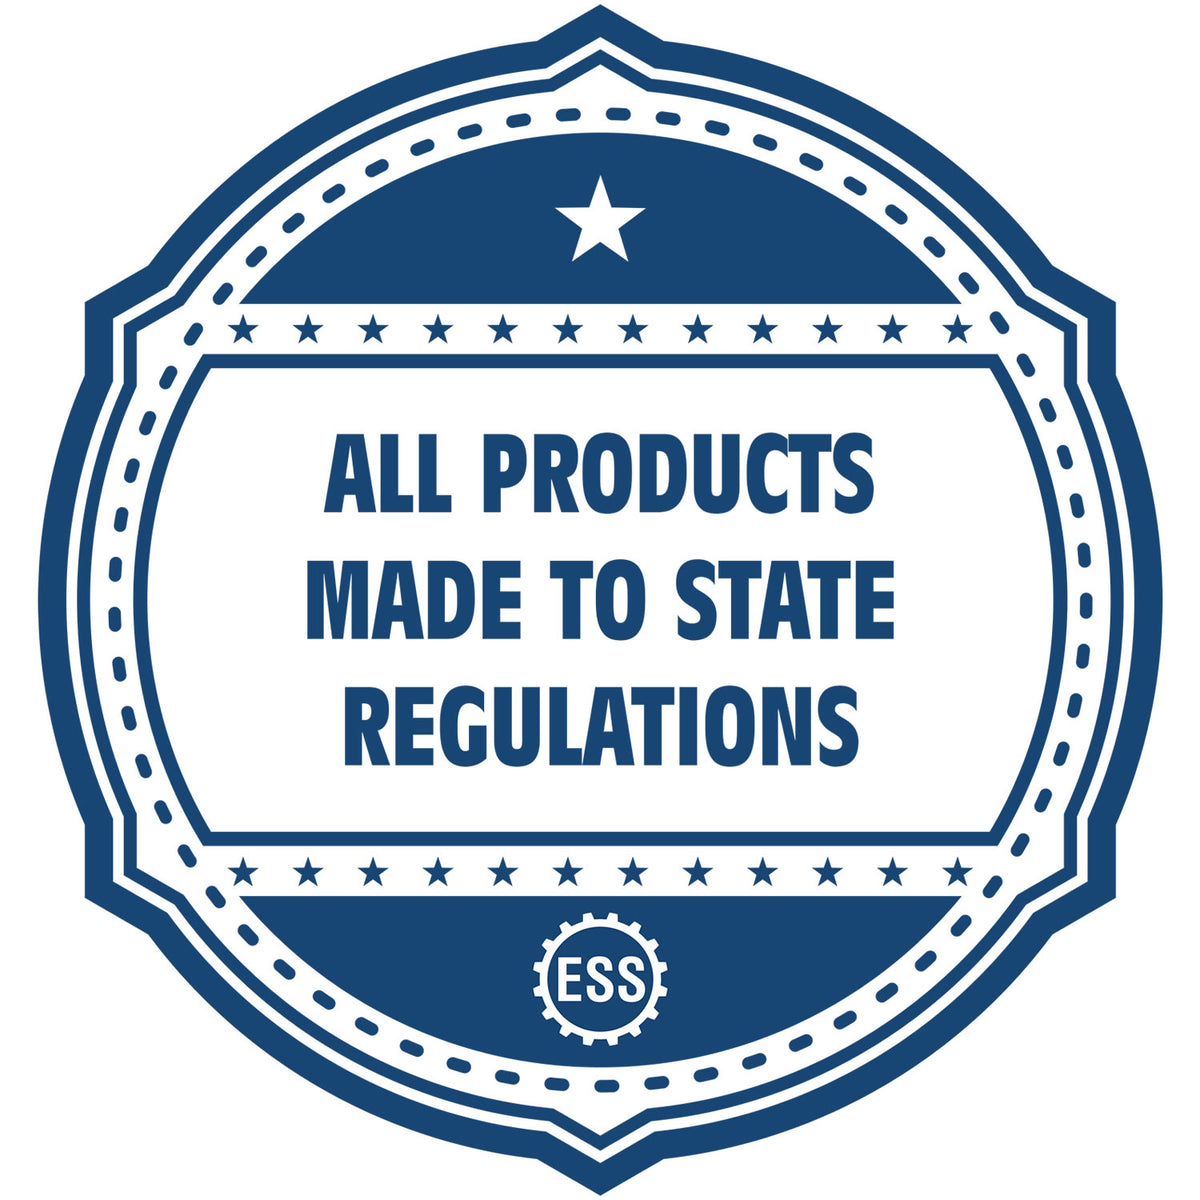 An icon or badge element for the Soft Maine Professional Engineer Seal showing that this product is made in compliance with state regulations.